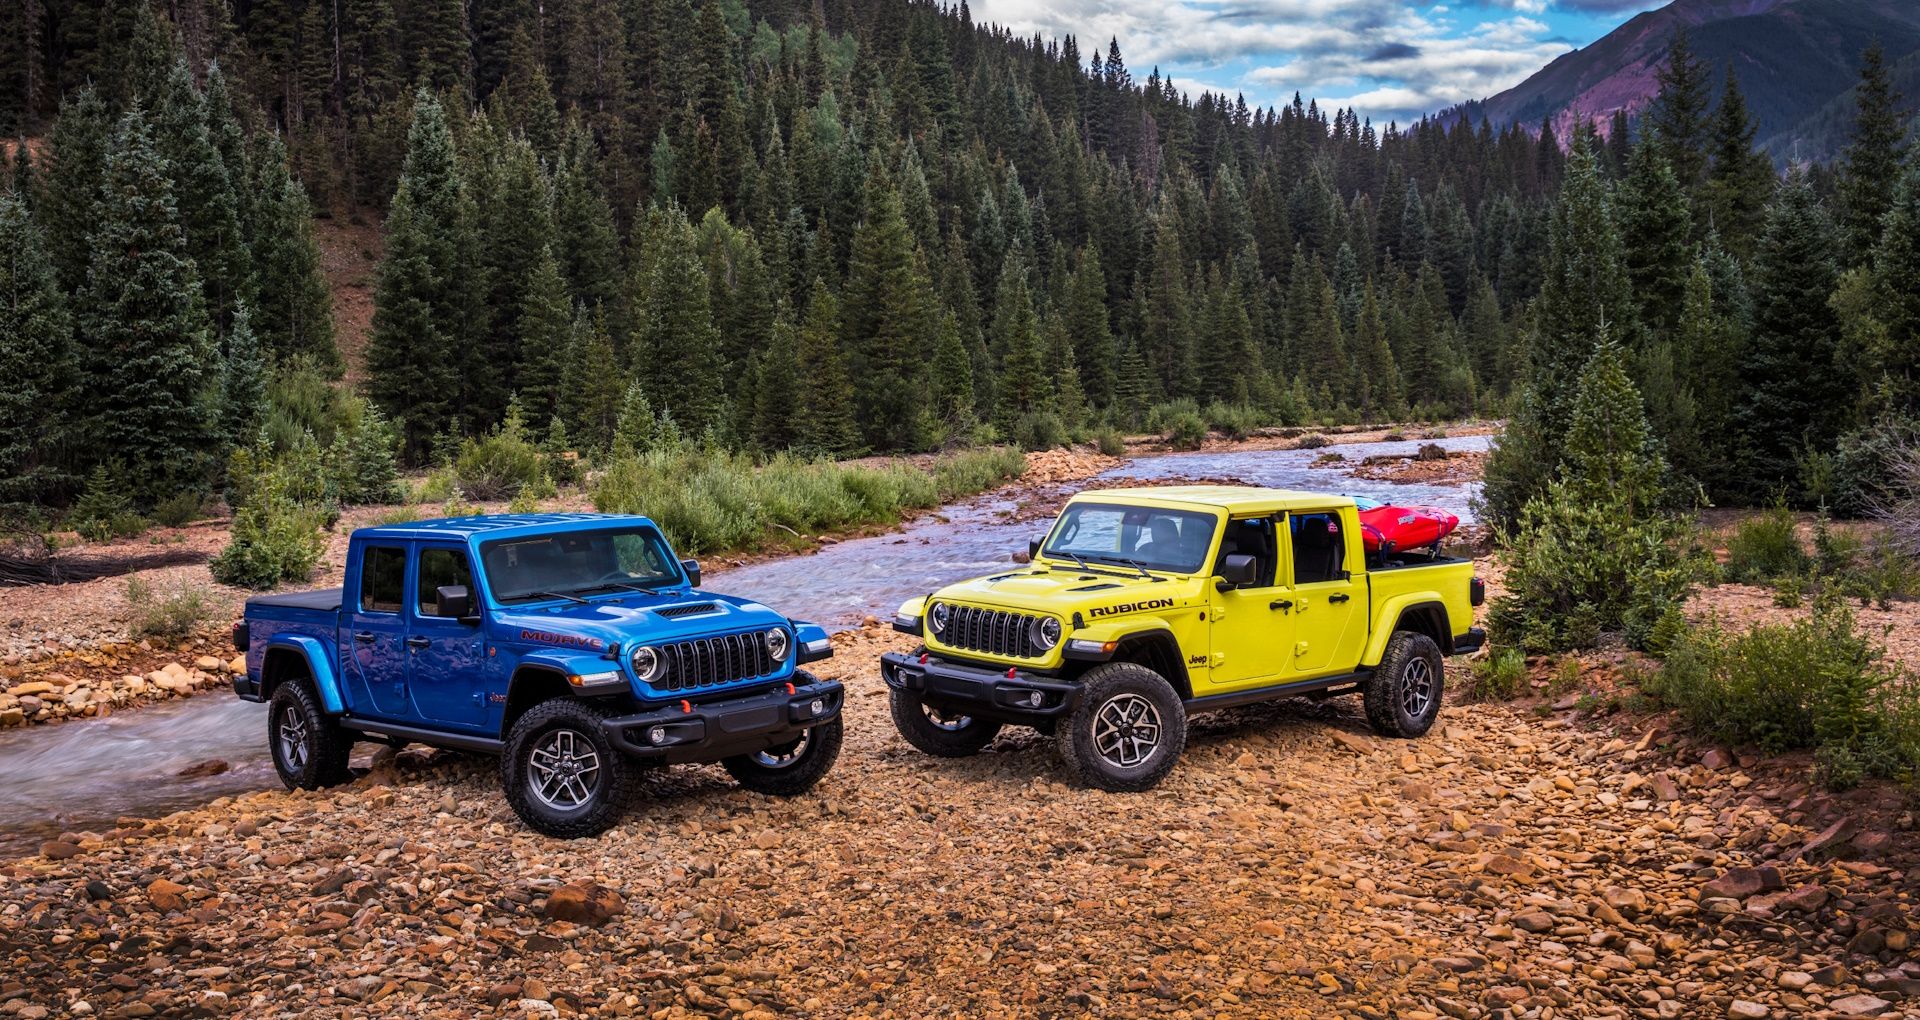 A blue Jeep Gladiator Mojave and a yellow Jeep Gladiator Rubicon next to a stream